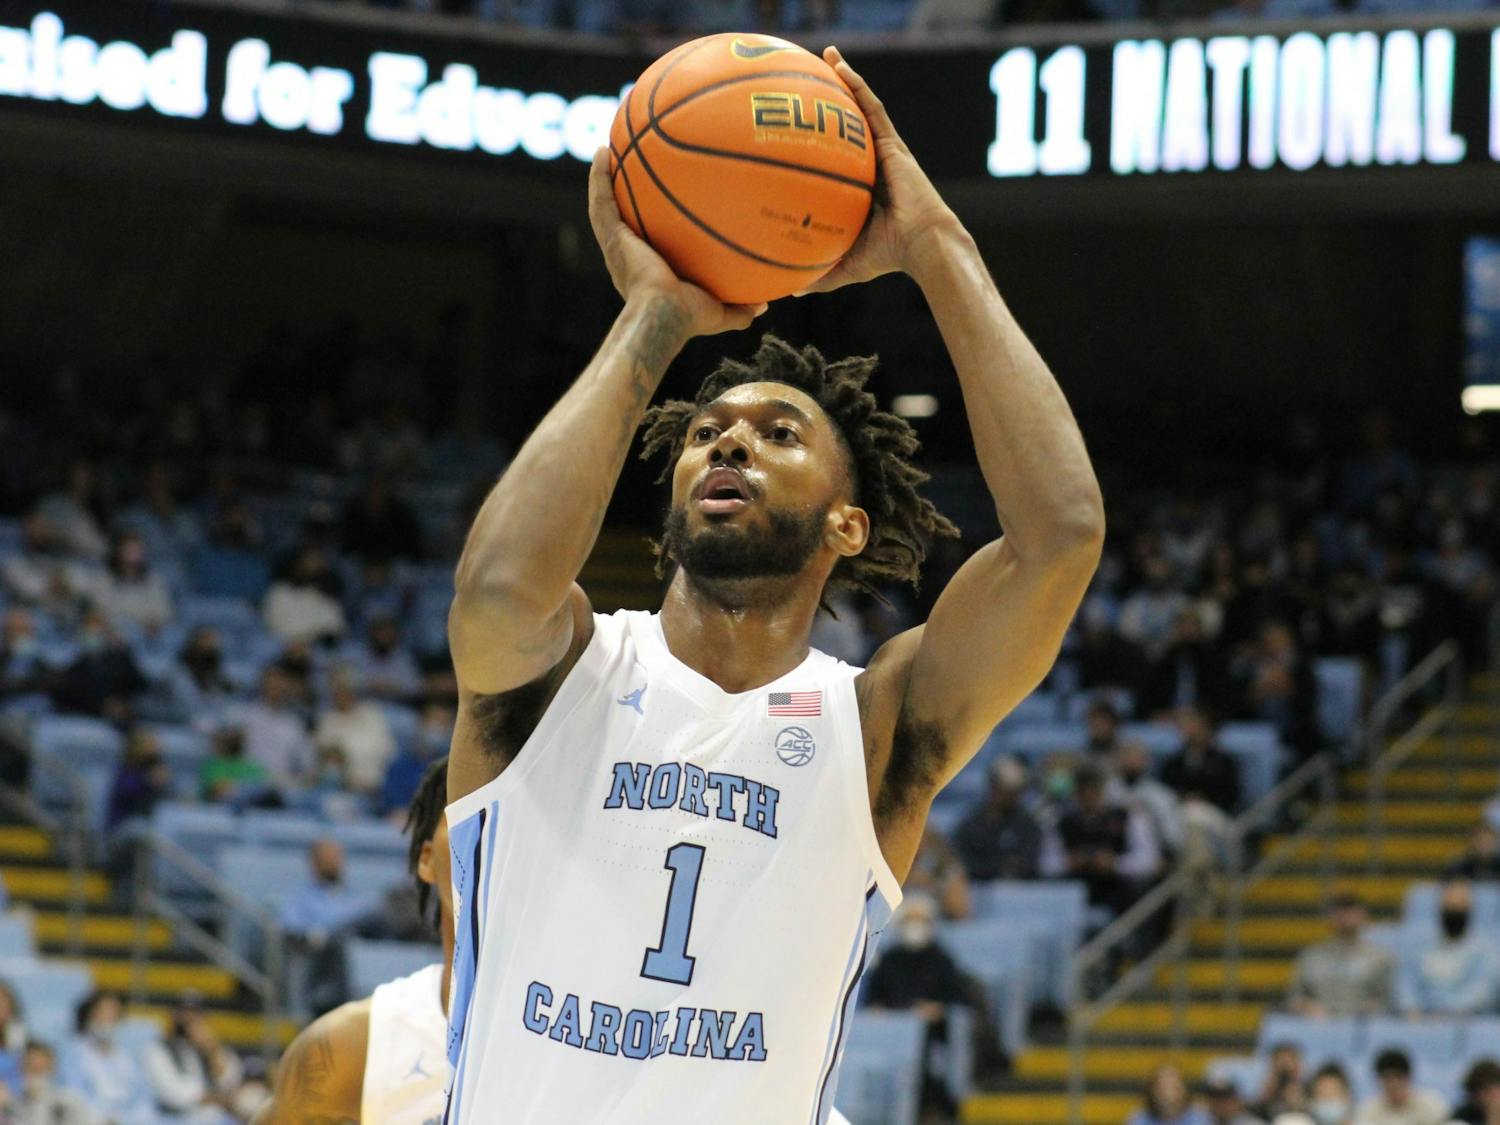 UNC senior guard/forward Leaky Black (1) fires a free throw during UNC men's basketball's 72-53 win against UNC Asheville on Tuesday, Nov. 23, 2021, in the Dean E. Smith Center. 